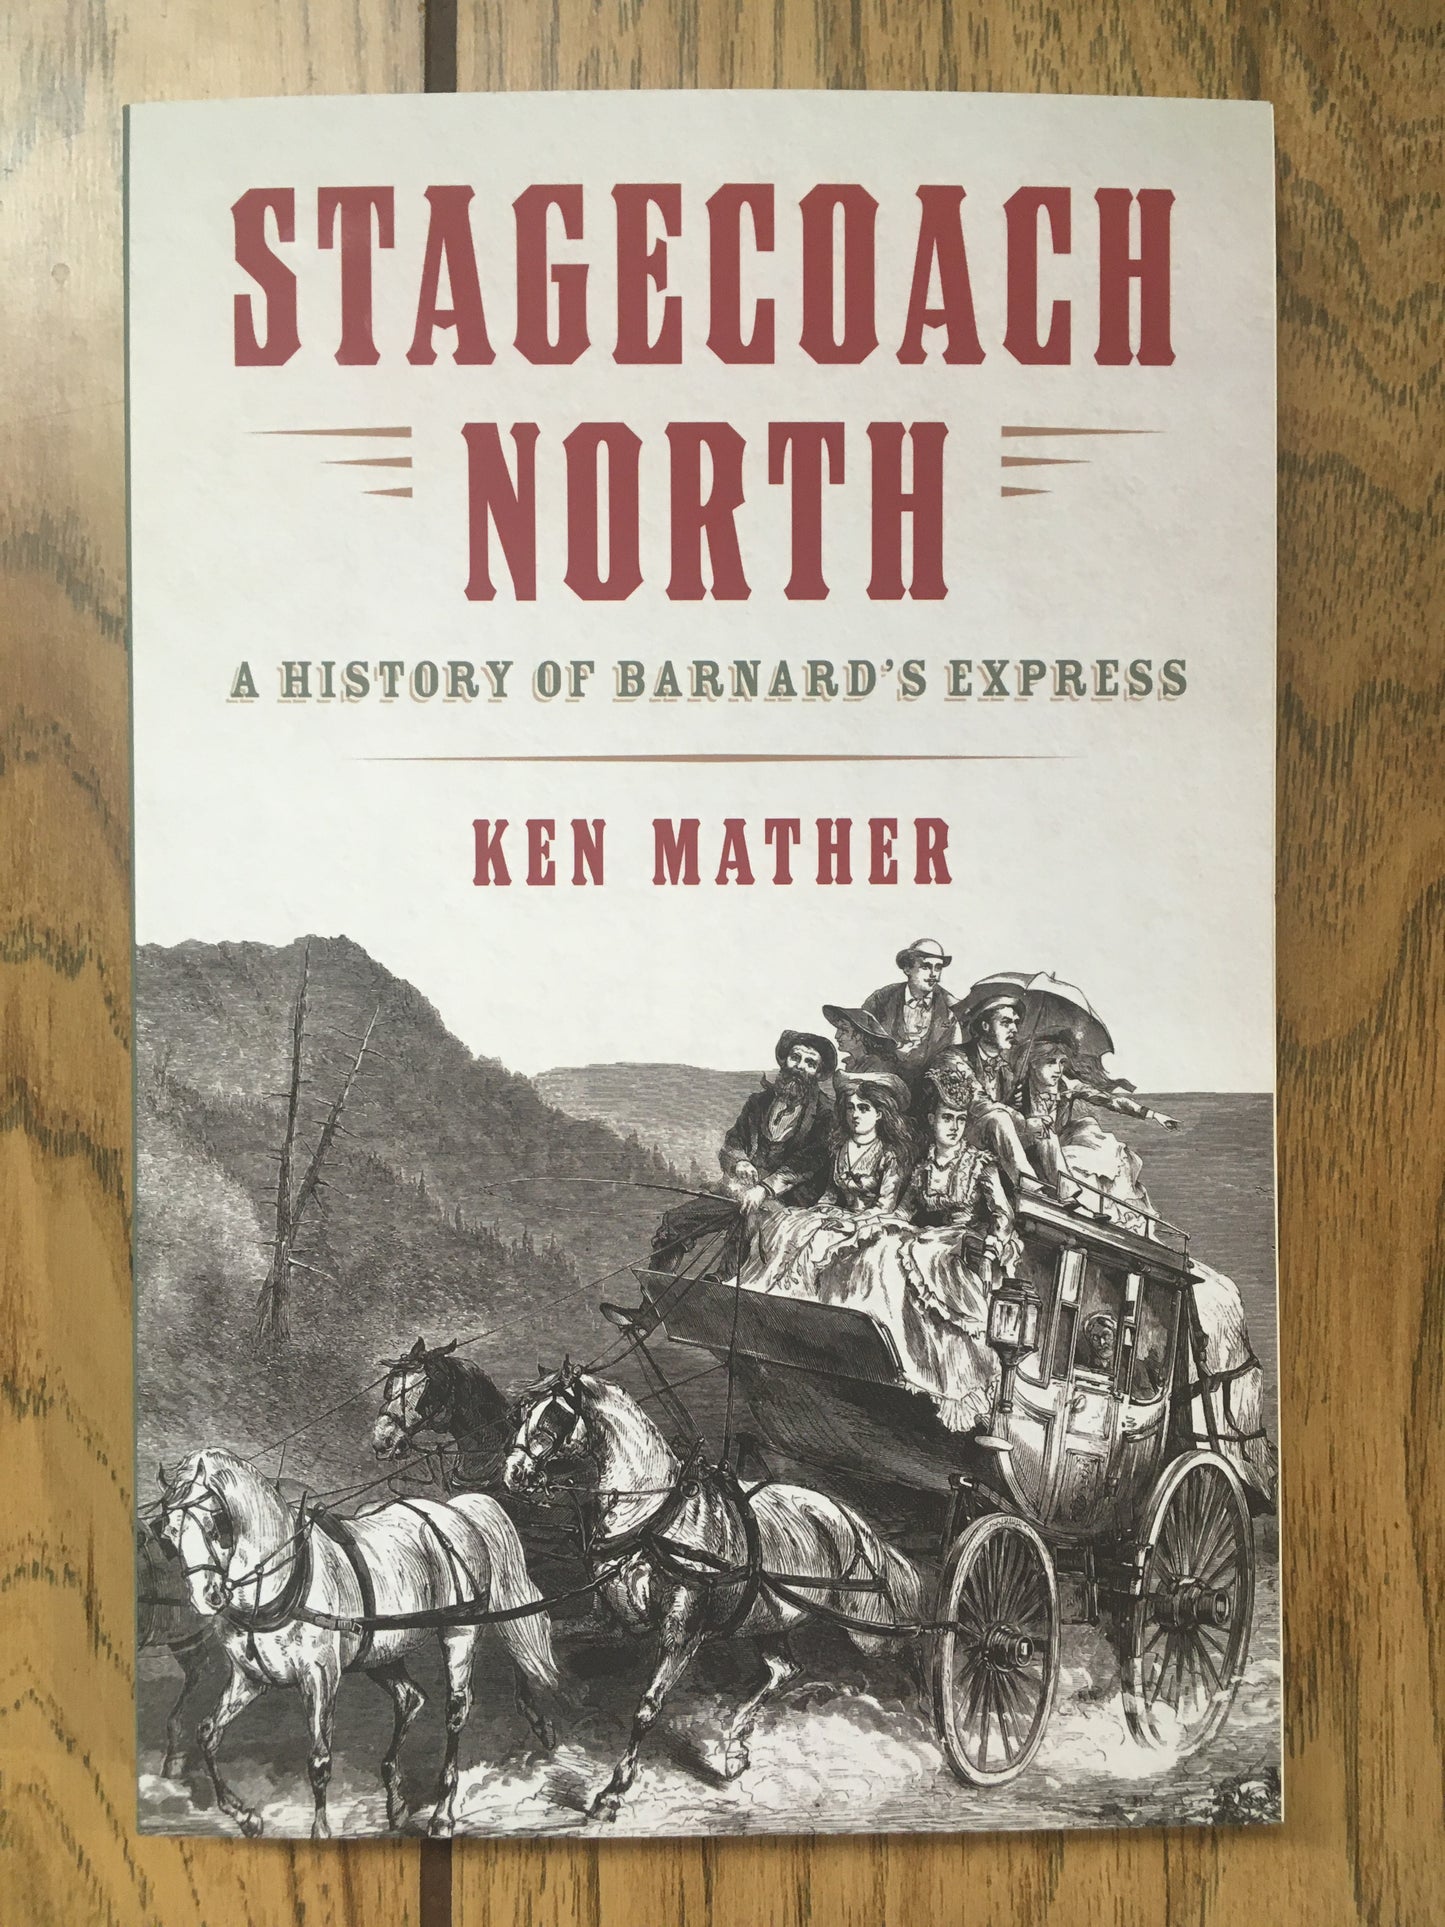 Stagecoach North: A History of Barnard's Express